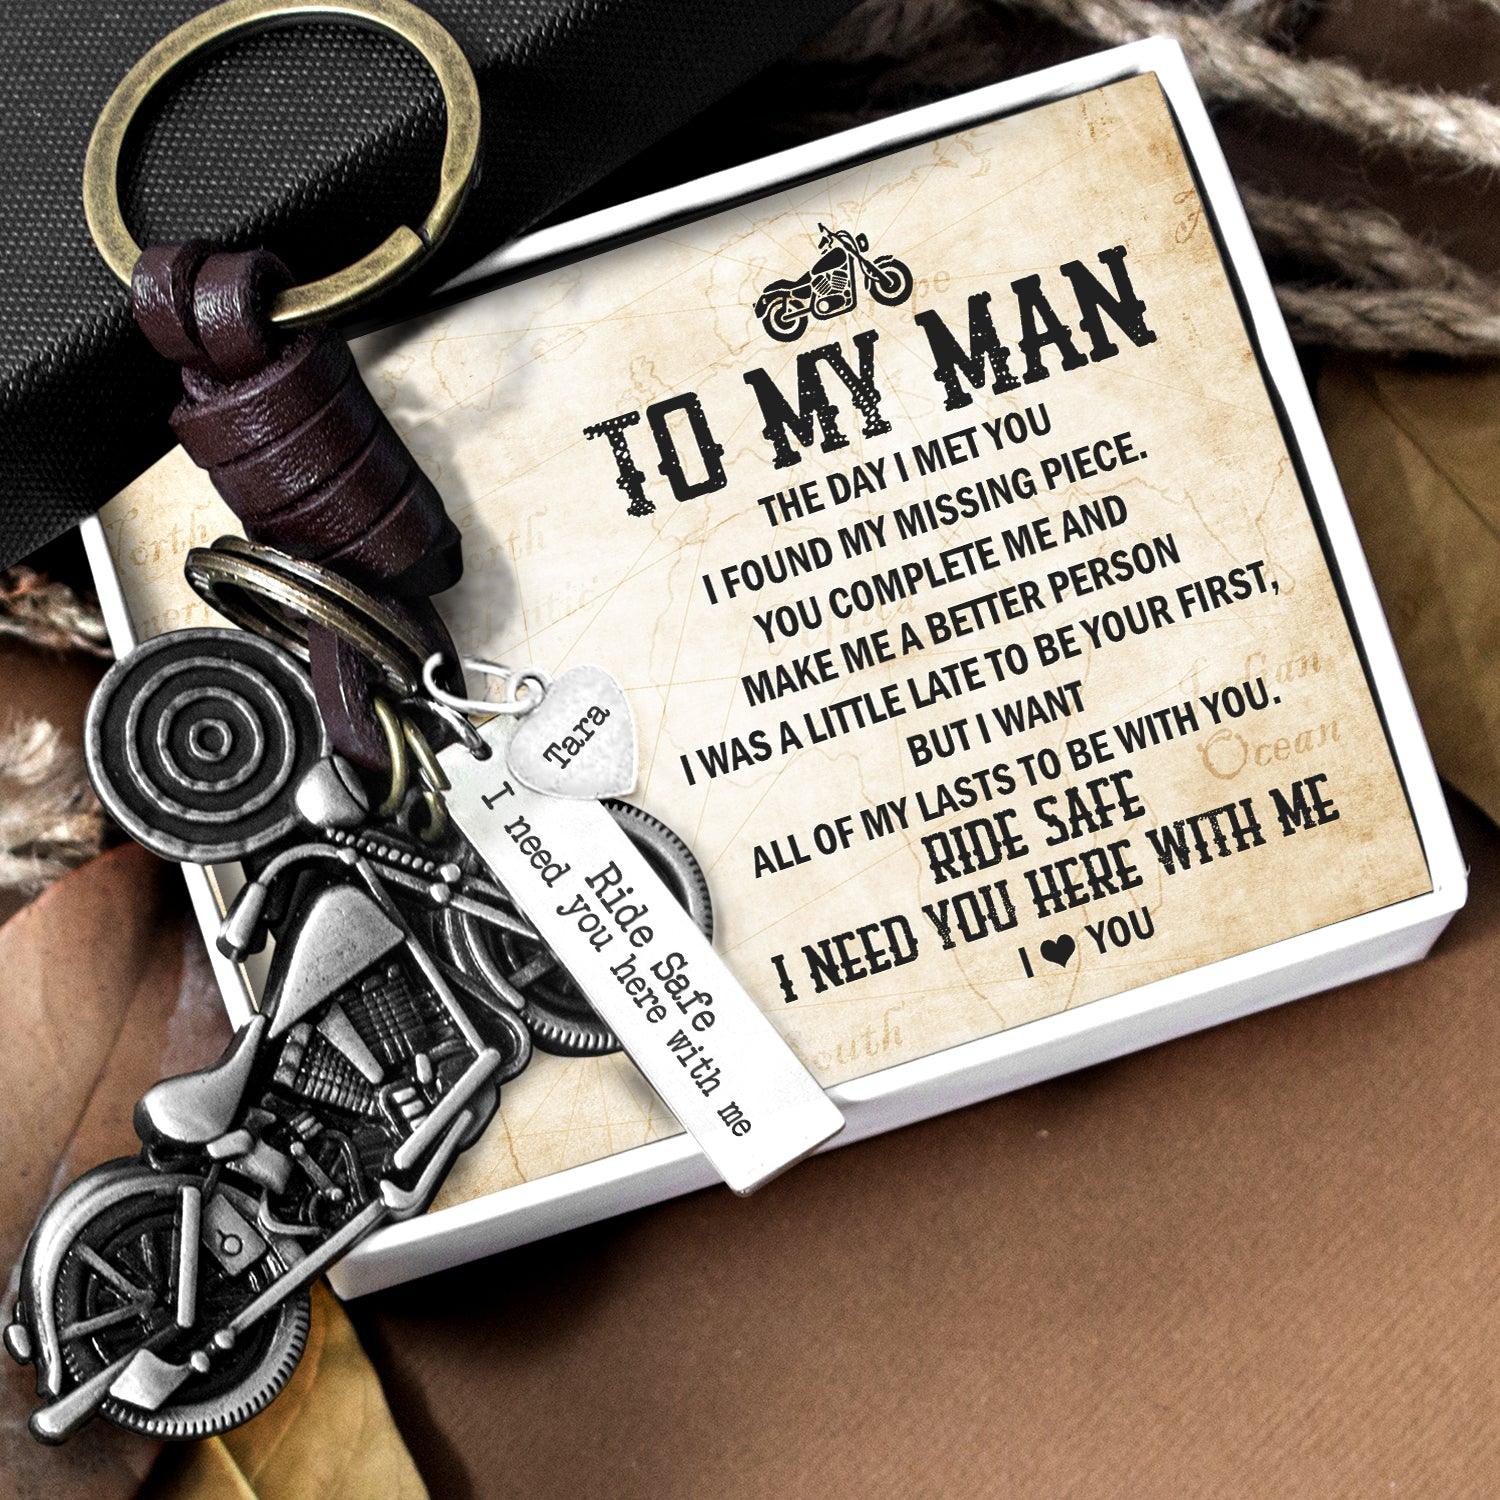 Personalised Motorcycle Keychain - Biker - To My Man - I Need You Here With Me - Augkx26009 - Gifts Holder